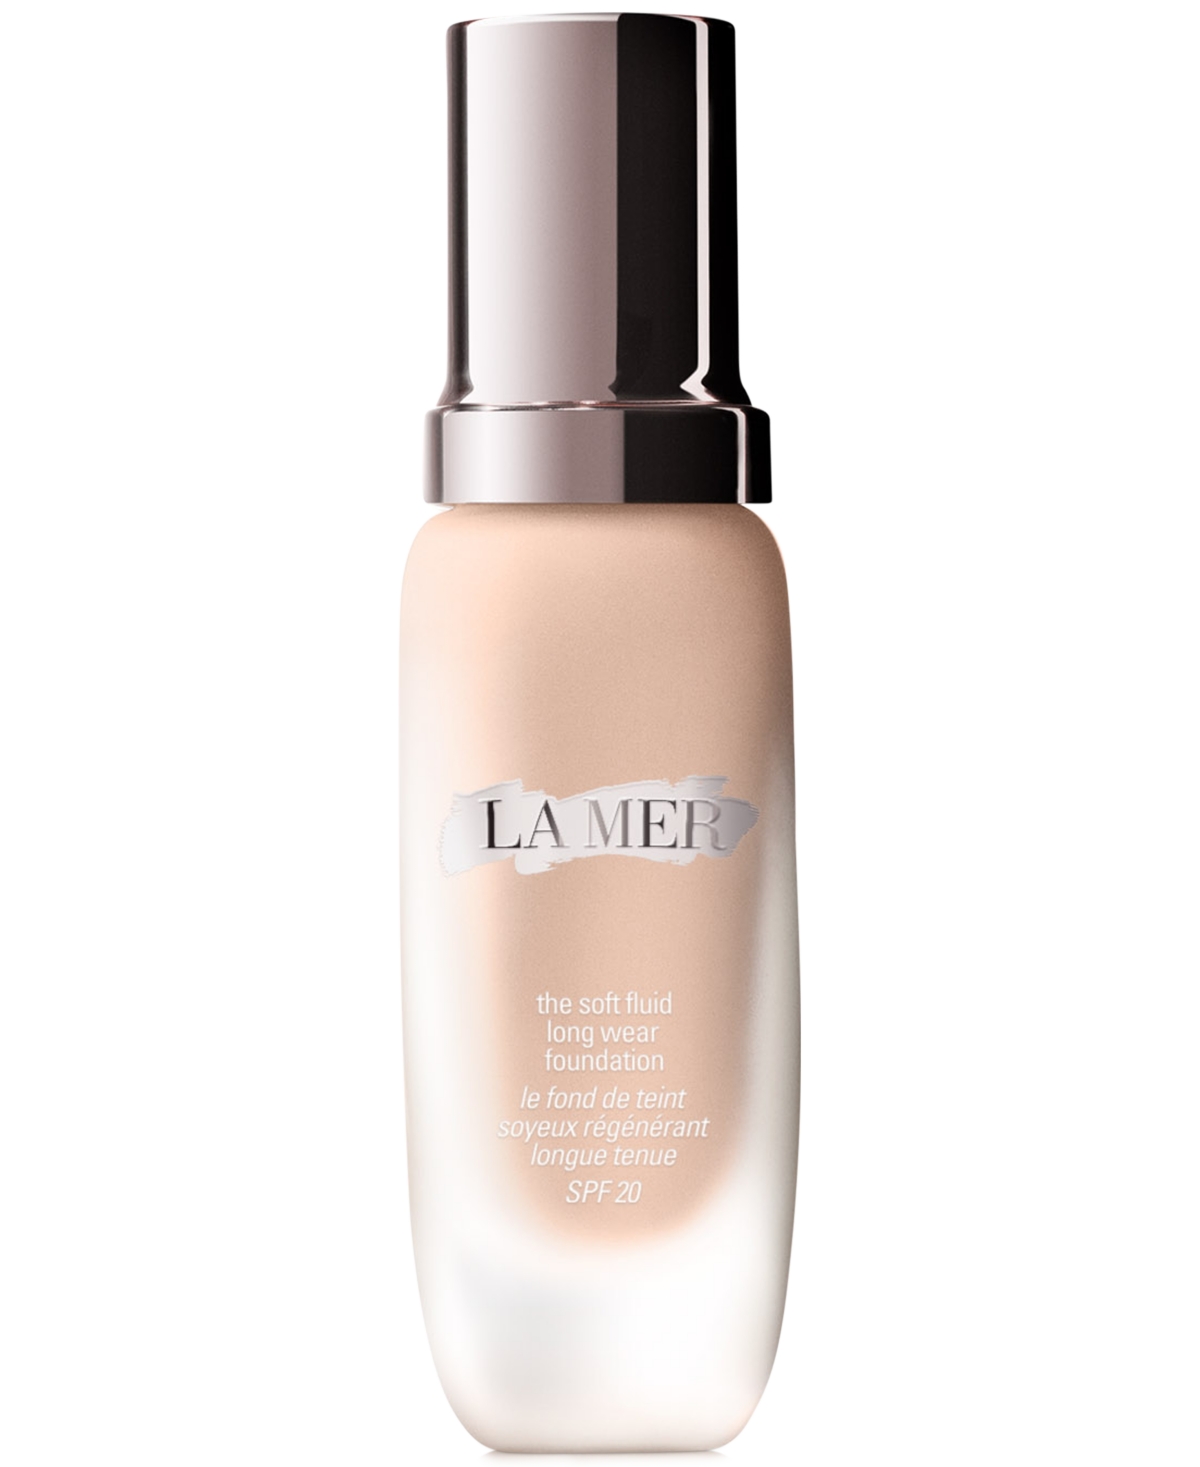 La Mer The Soft Fluid Long Wear Foundation Spf 20 In Bisque